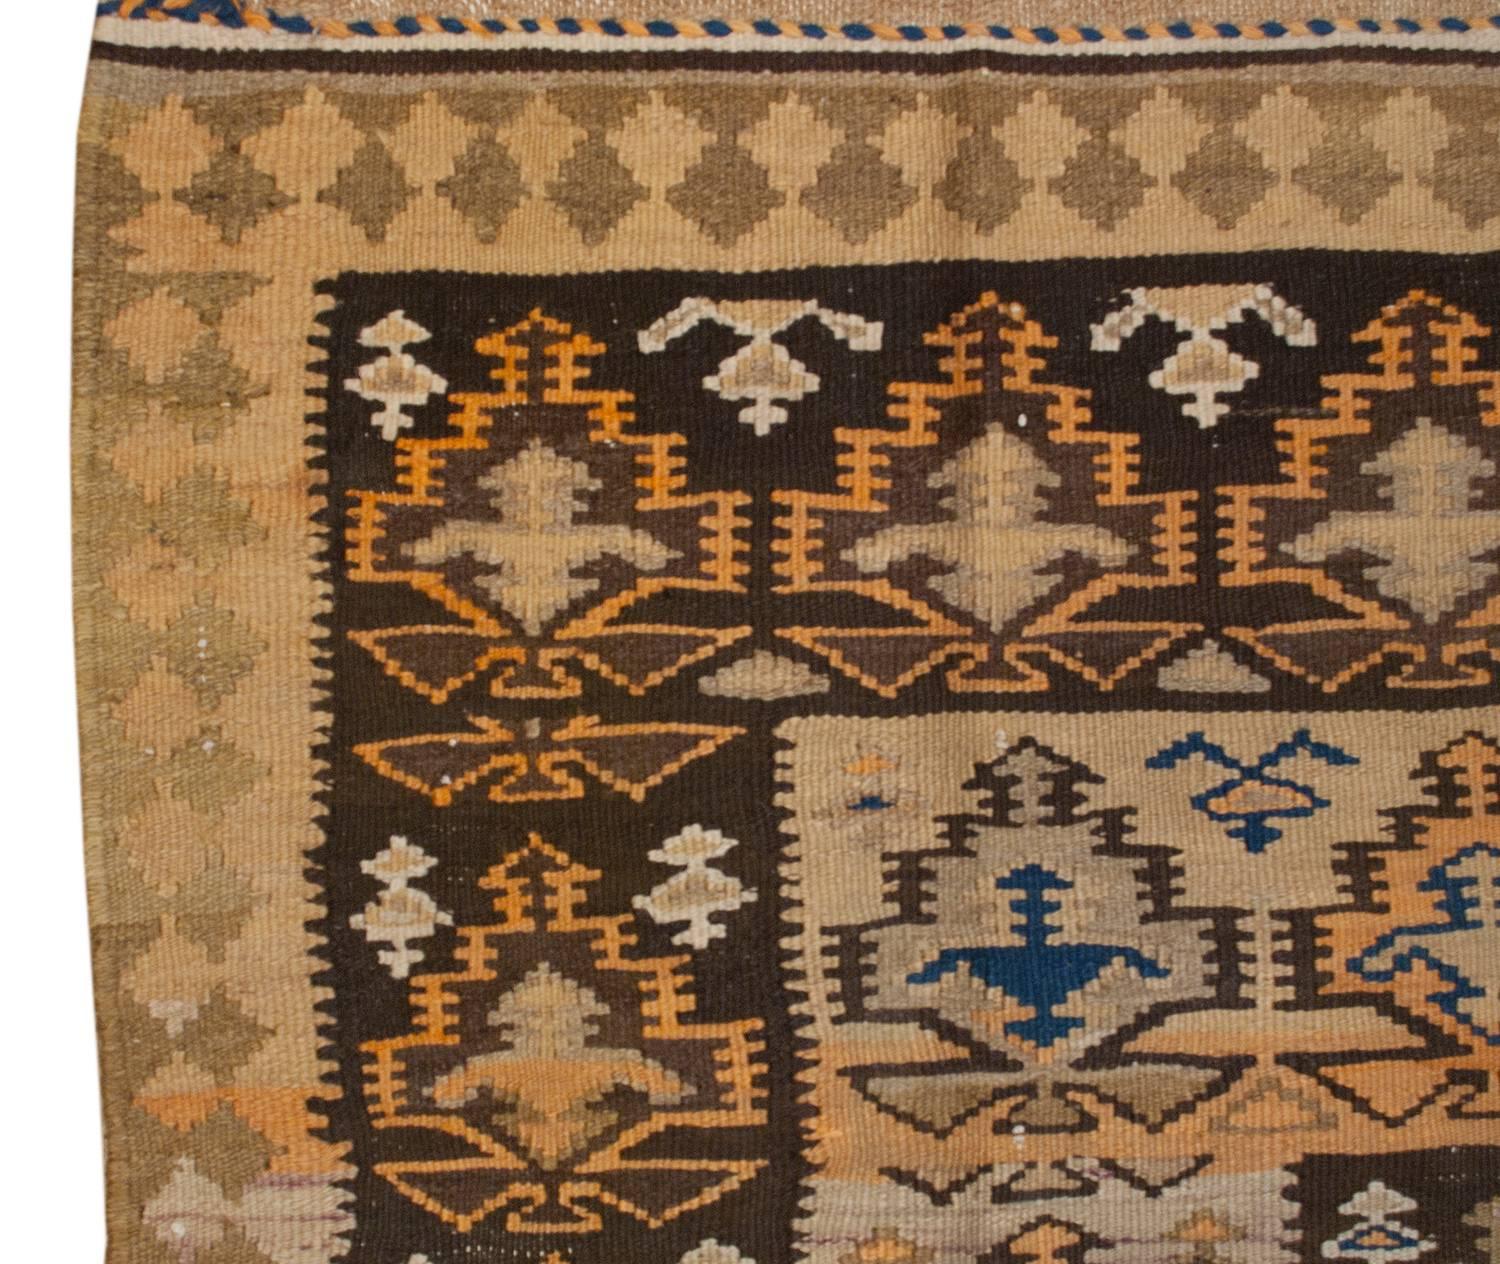 A beautiful early 20th century Persian Qazvin Kilim runner with a wonderful pattern of stylized trees-of-life, woven in multi-colored vegetables dyed wool, in a graduated rectangle design. The border is simple, with a tone on tone geometric diamond